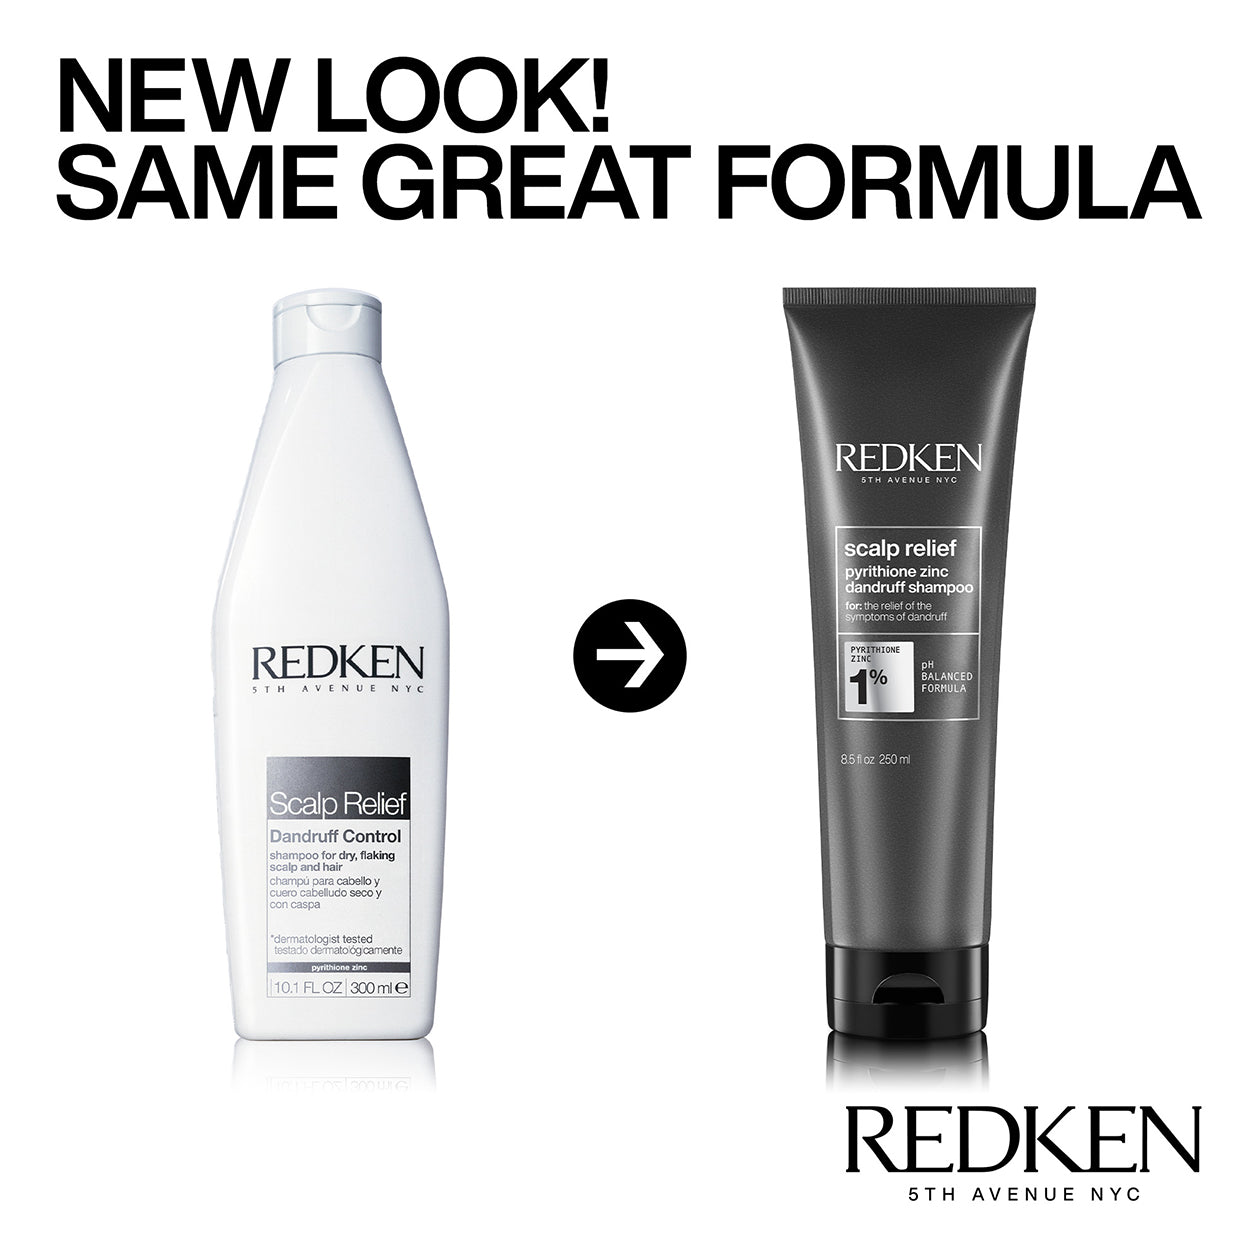 Redken Scalp Relief Control Shampoo 8.5oz / 250ml - Redken Hair Products for Soothes Silky Smooth Shiny Hair, & Controls Dandruff